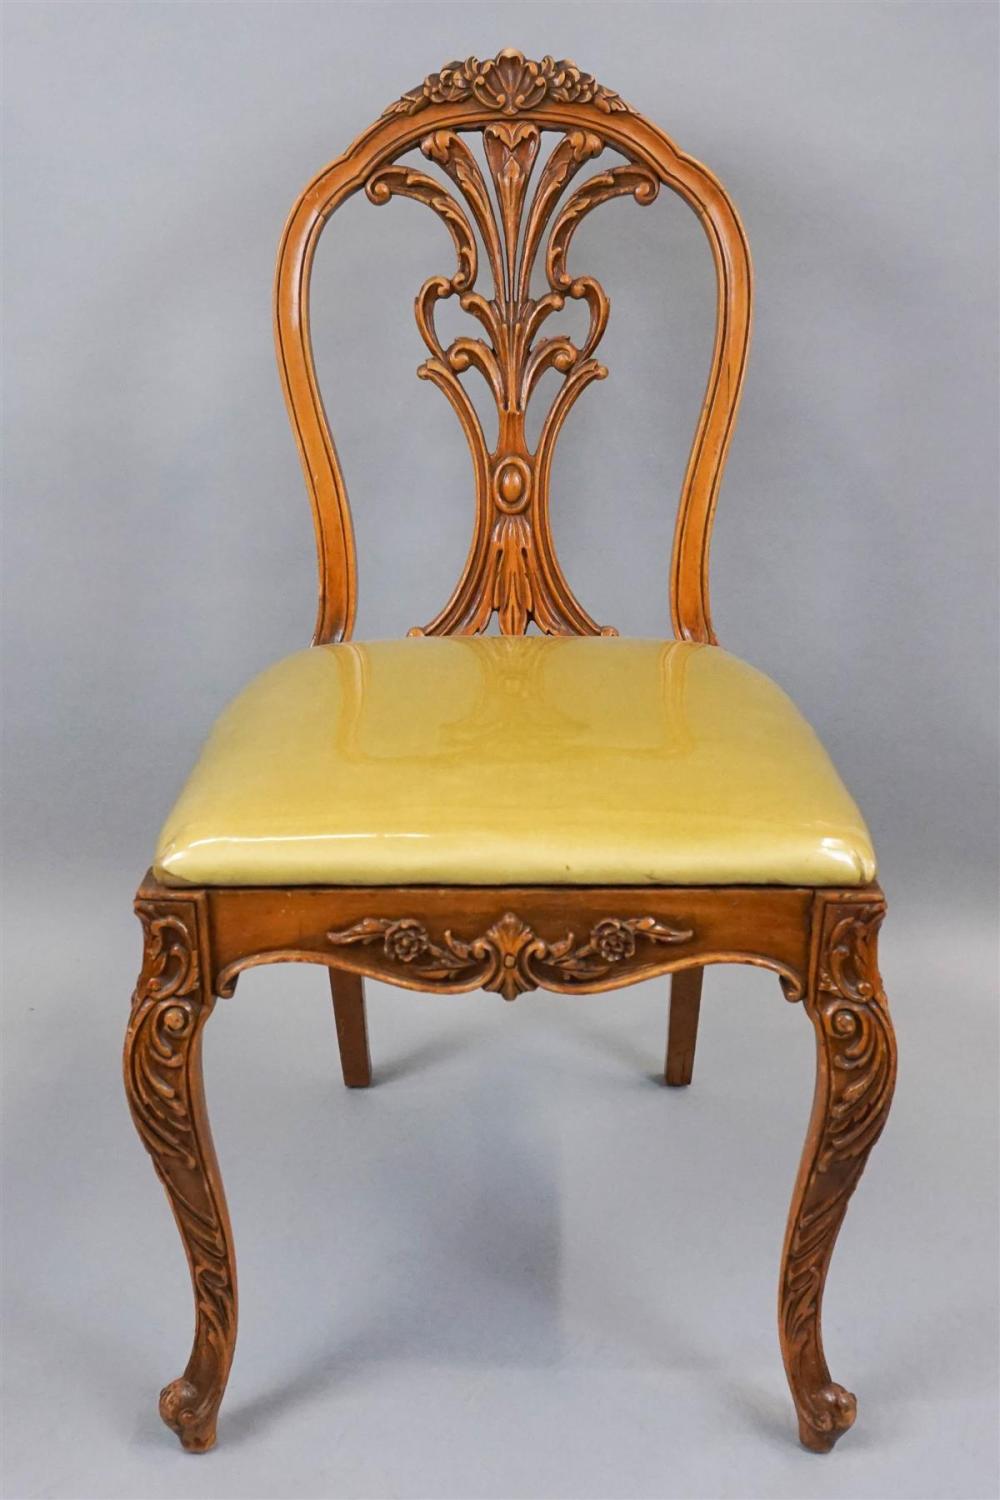 LOUIS XV STYLE CHAIR WITH LIME 33b563